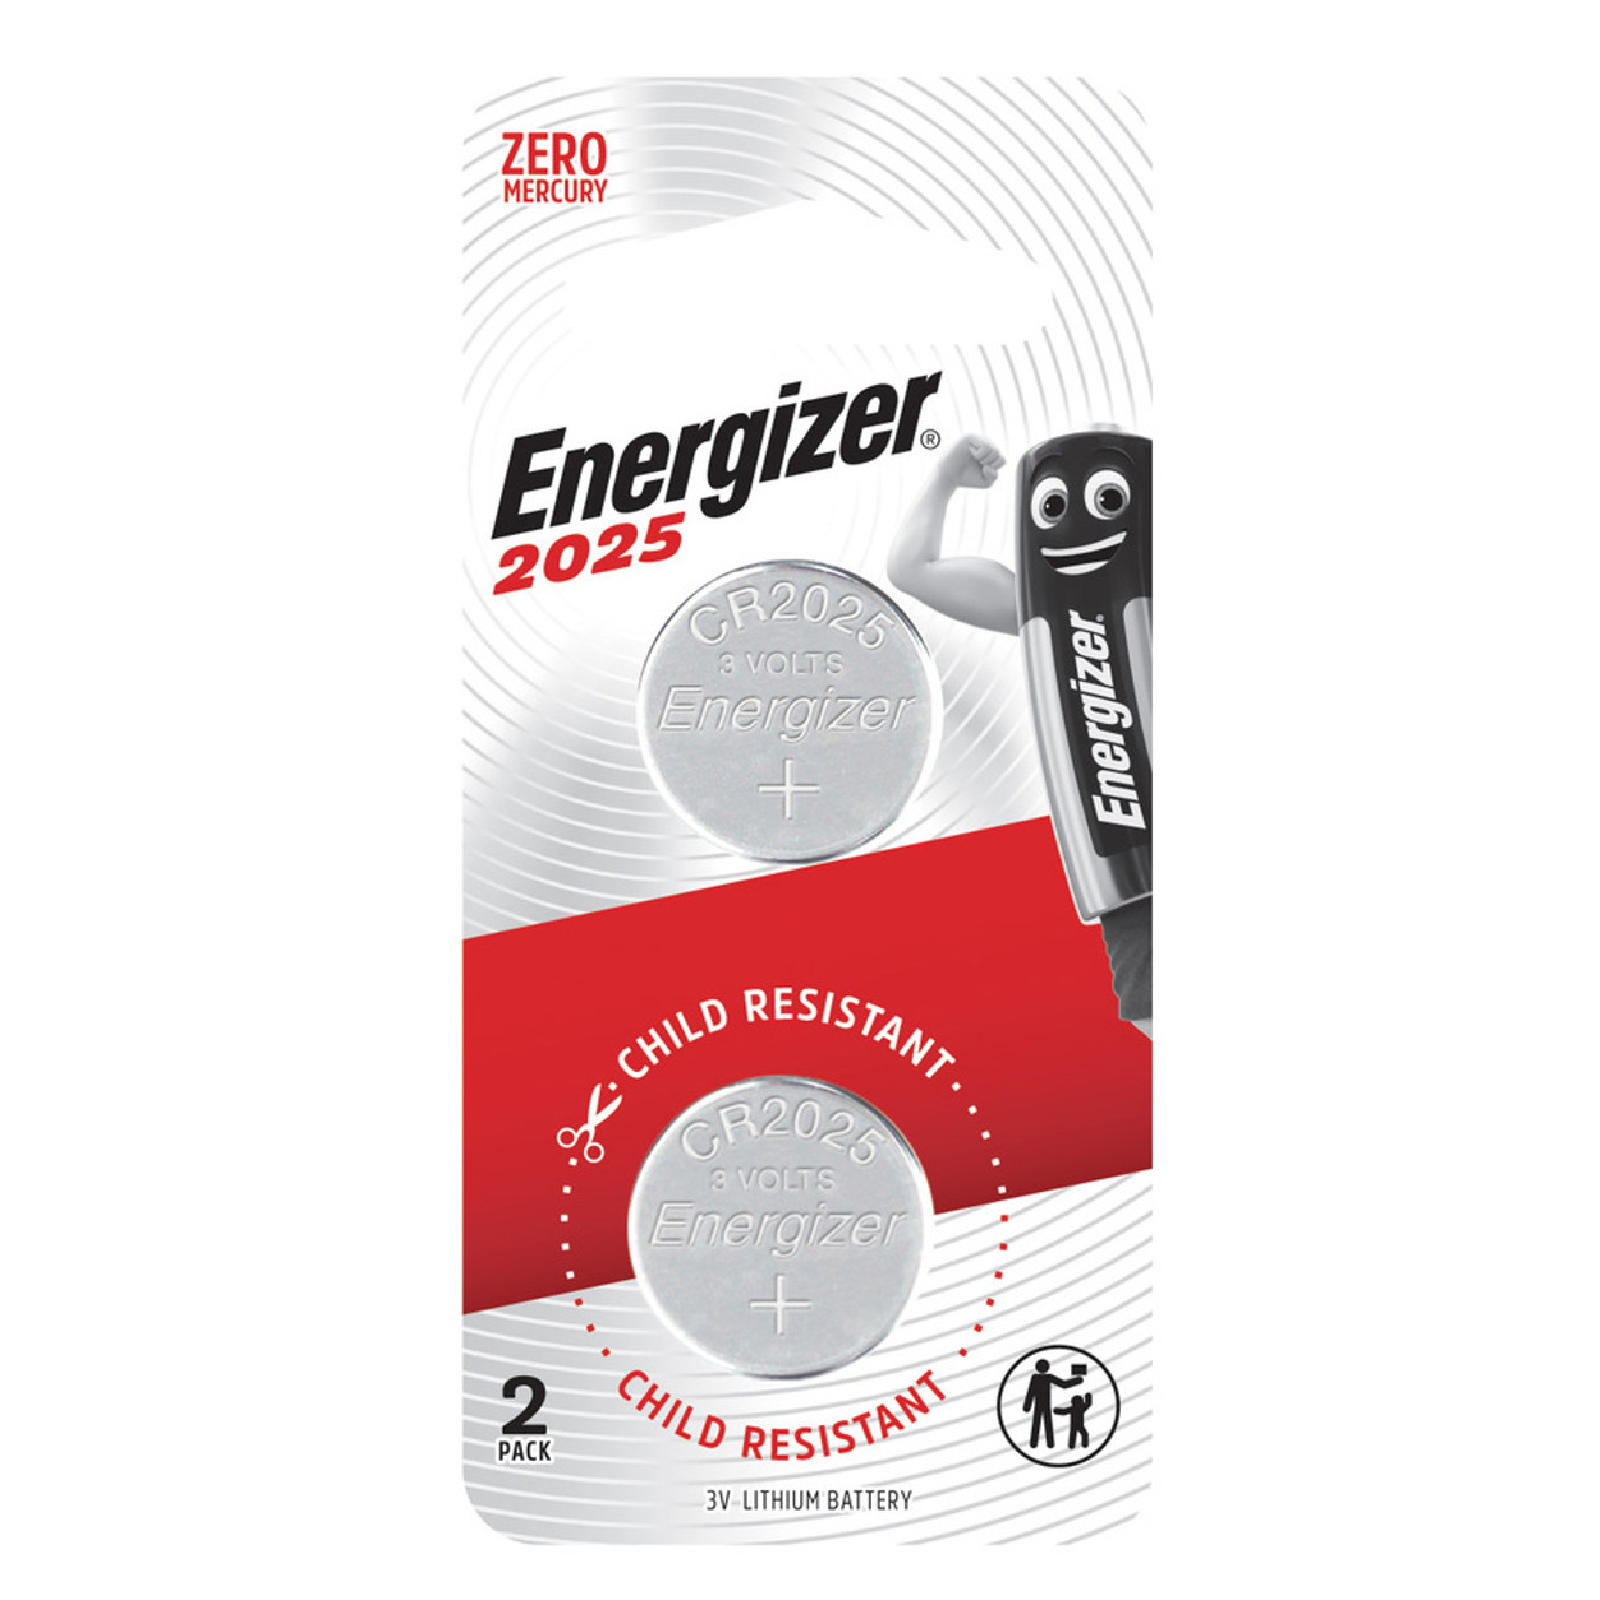 Energizer 3V Lithium Coin Battery CR2025, 2PC/Card